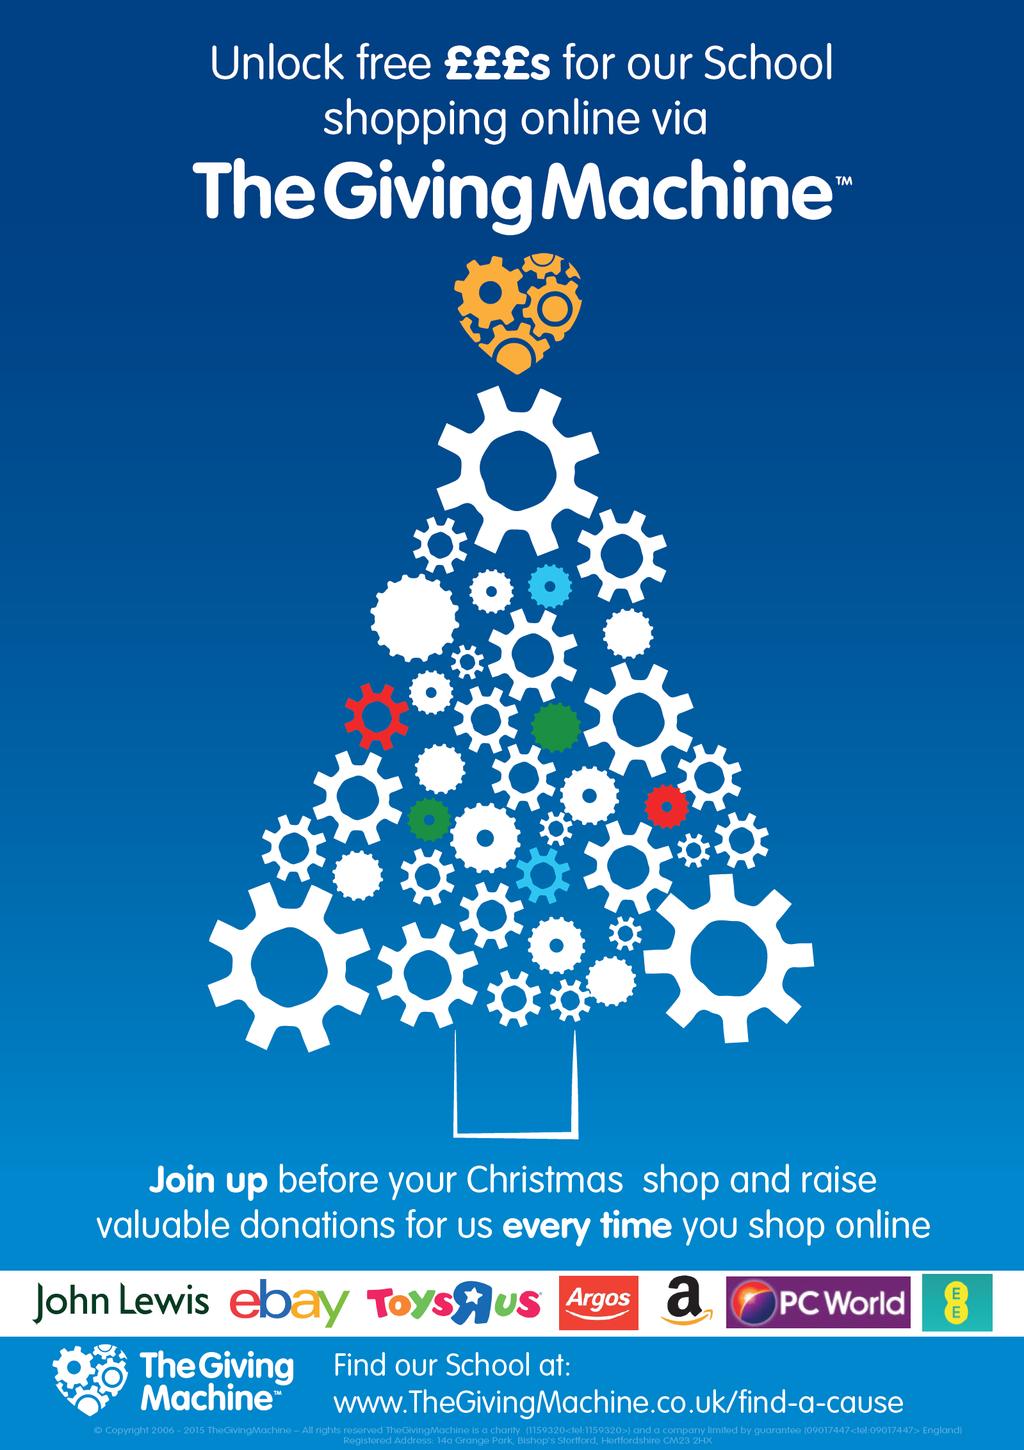 Remember! When you are buying Christmas presents online, make sure that you generate a free cash donation with every purchase via www.thegivingmachine.co.uk.